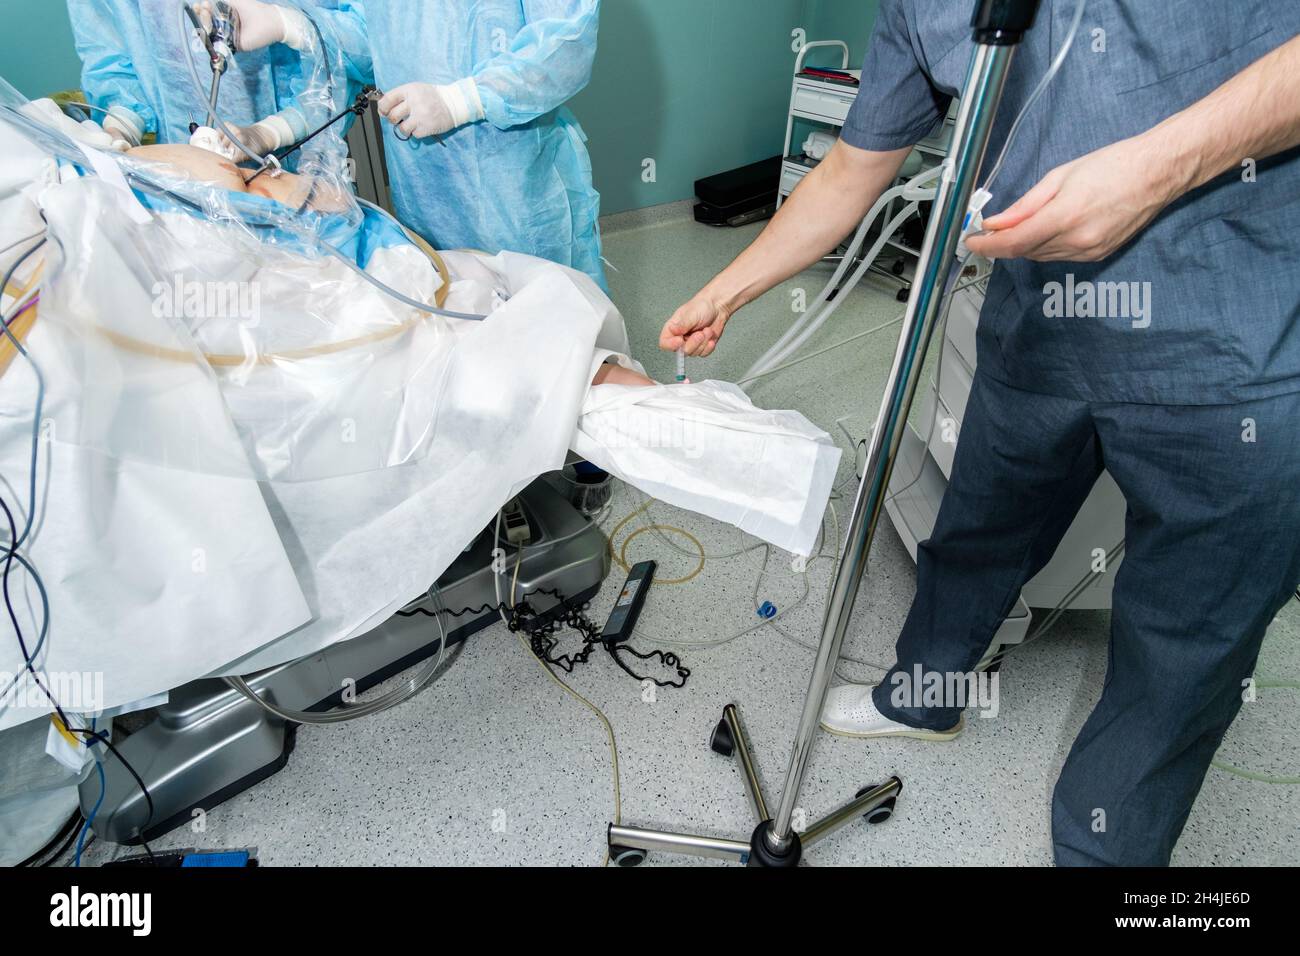 The doctor injects anesthesia into the patient's arm during surgery. Intravenous drip catheter for injecting anesthesia into the patient's arm. General anesthesia during surgery. Stock Photo